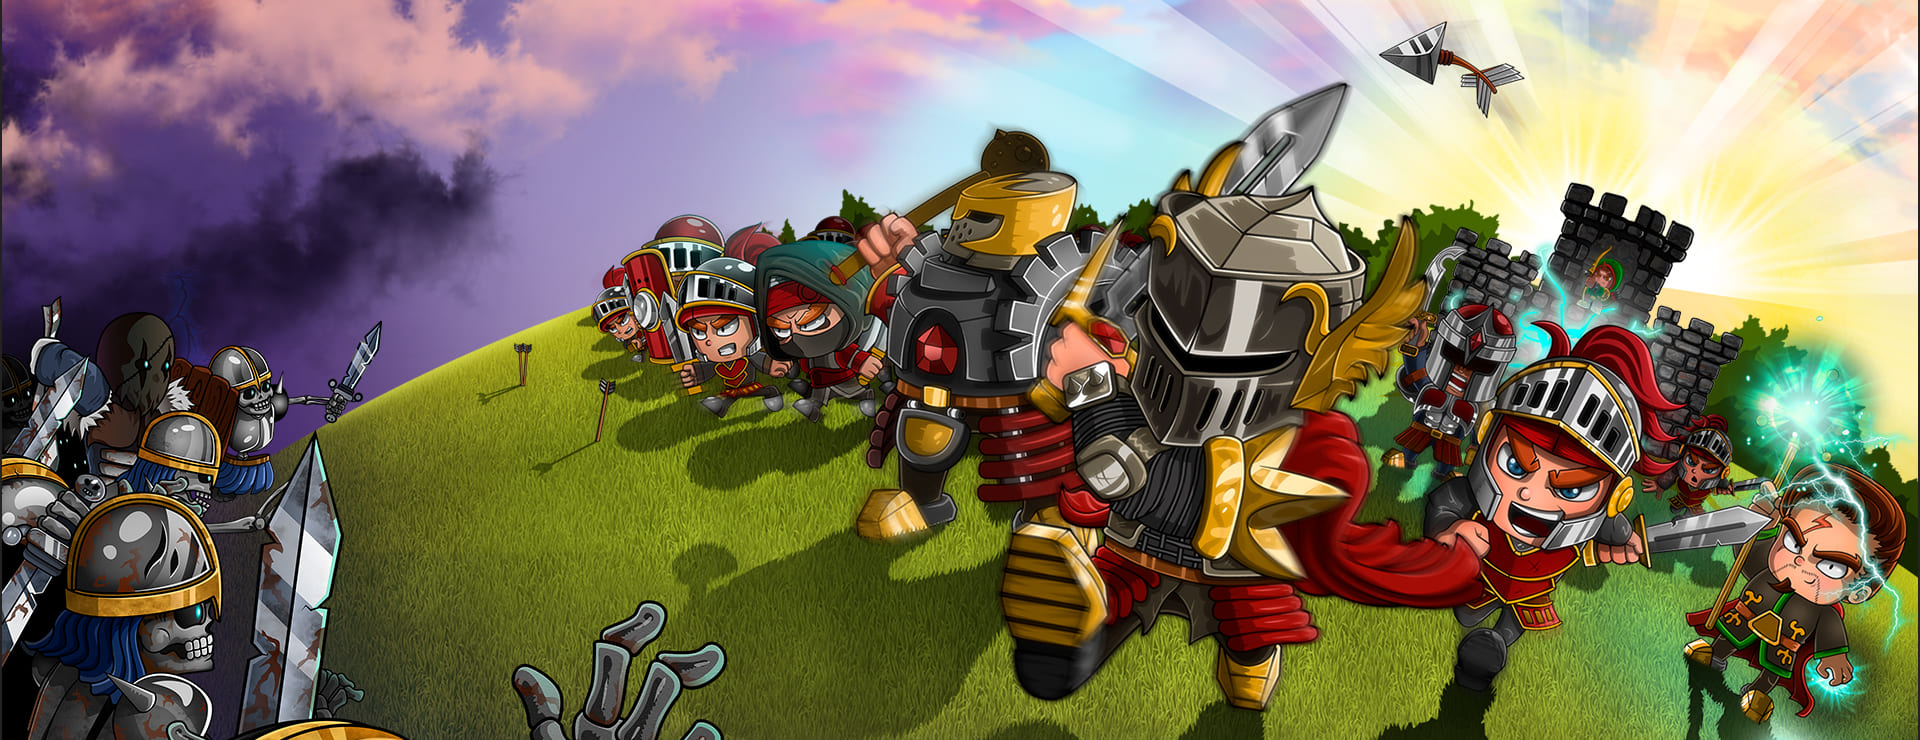 Tower defense game